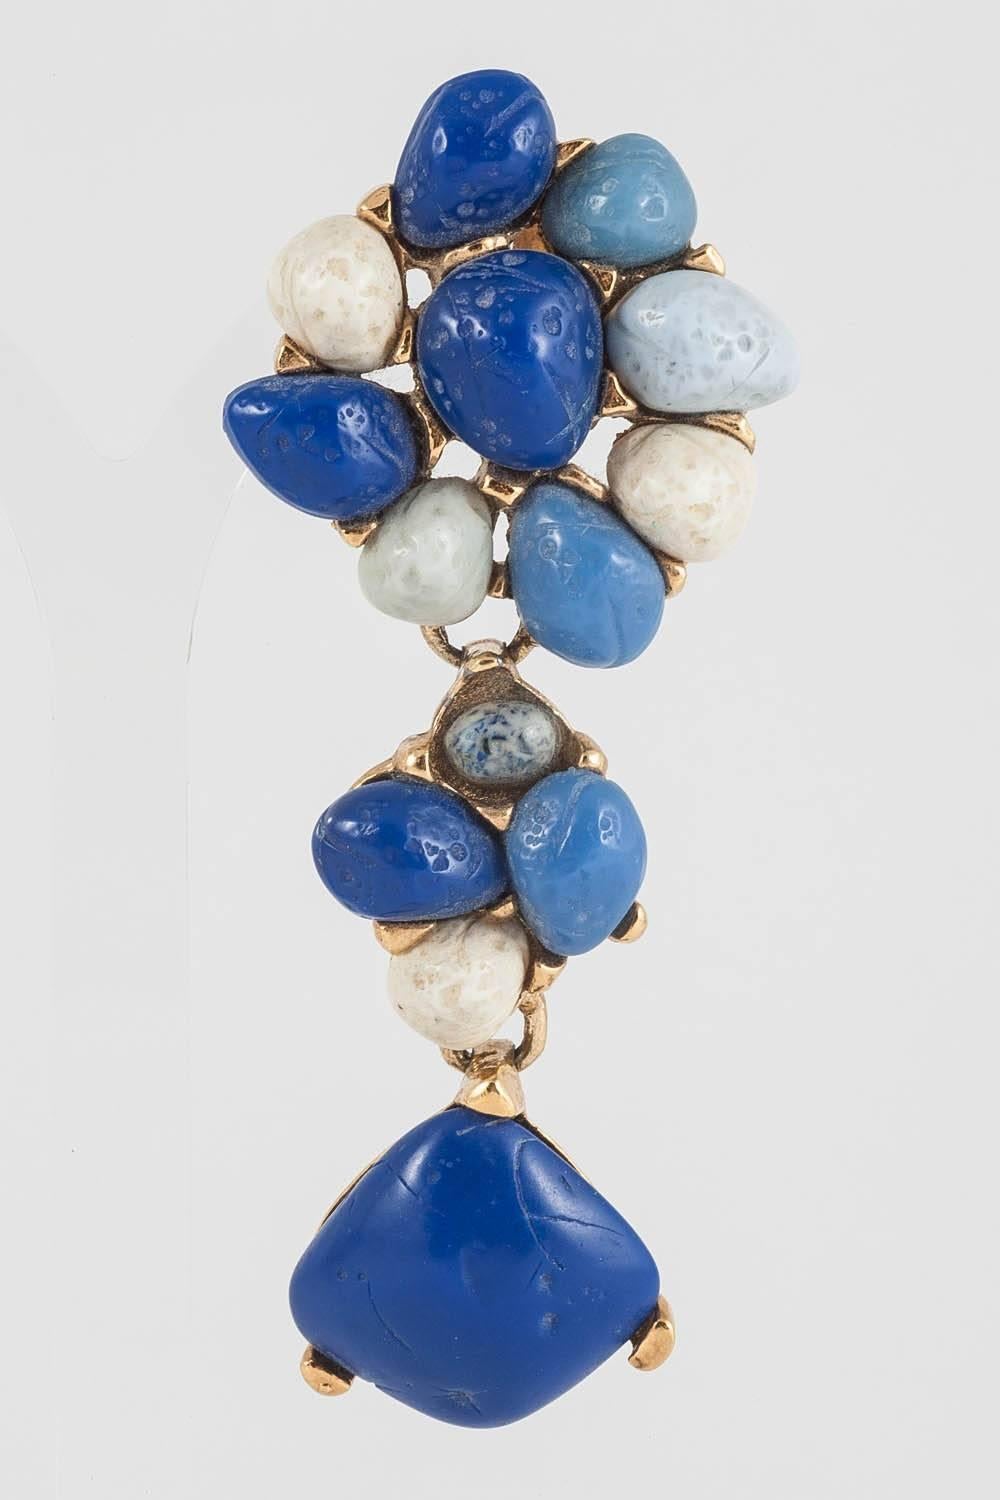 Striking Summery earrings, from Guy Laroche, made from gilded metal and resin 'nuggets/stones', imitating agates, lapis lazuli and others. Although very long, these earrings look heavier than they are to wear, but are very glamorous and perfect for